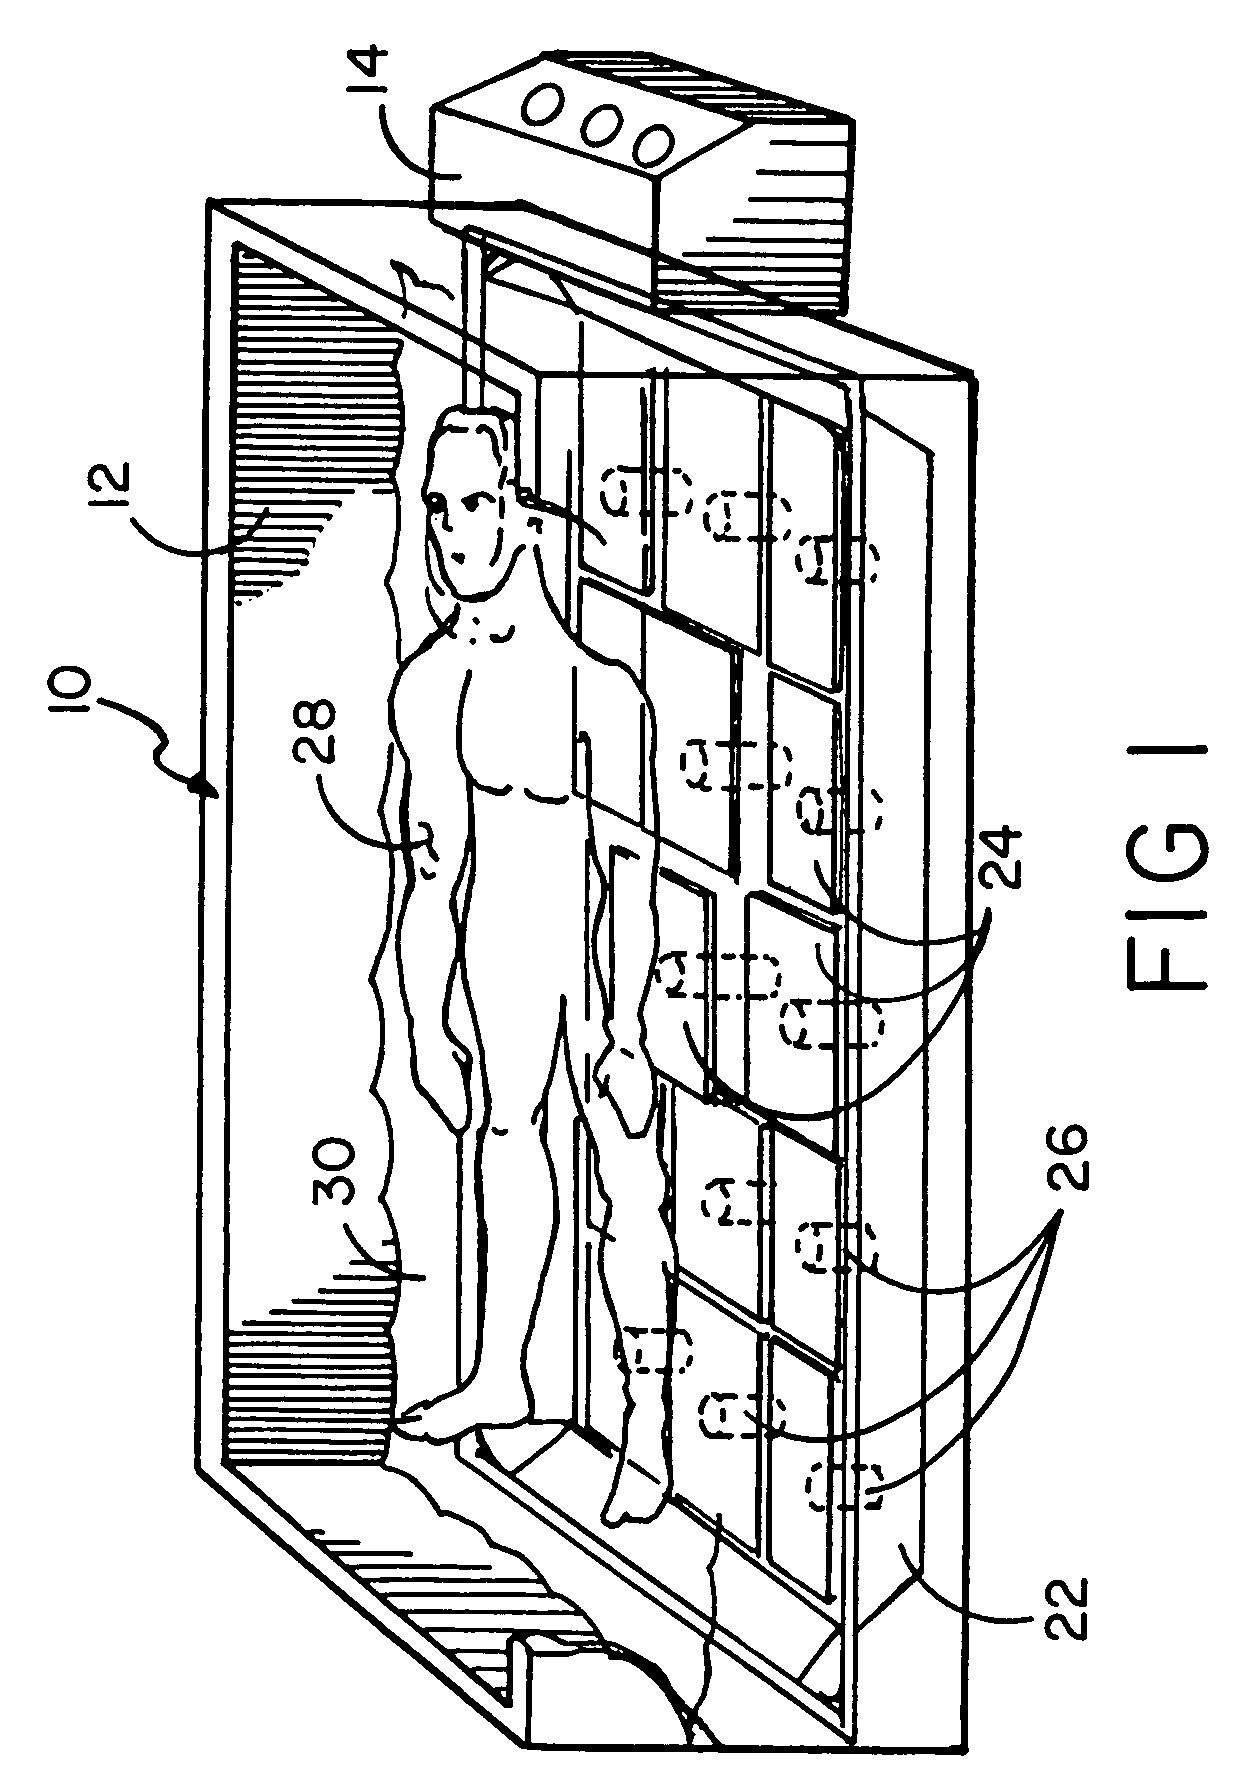 Wave exercise device and method of use